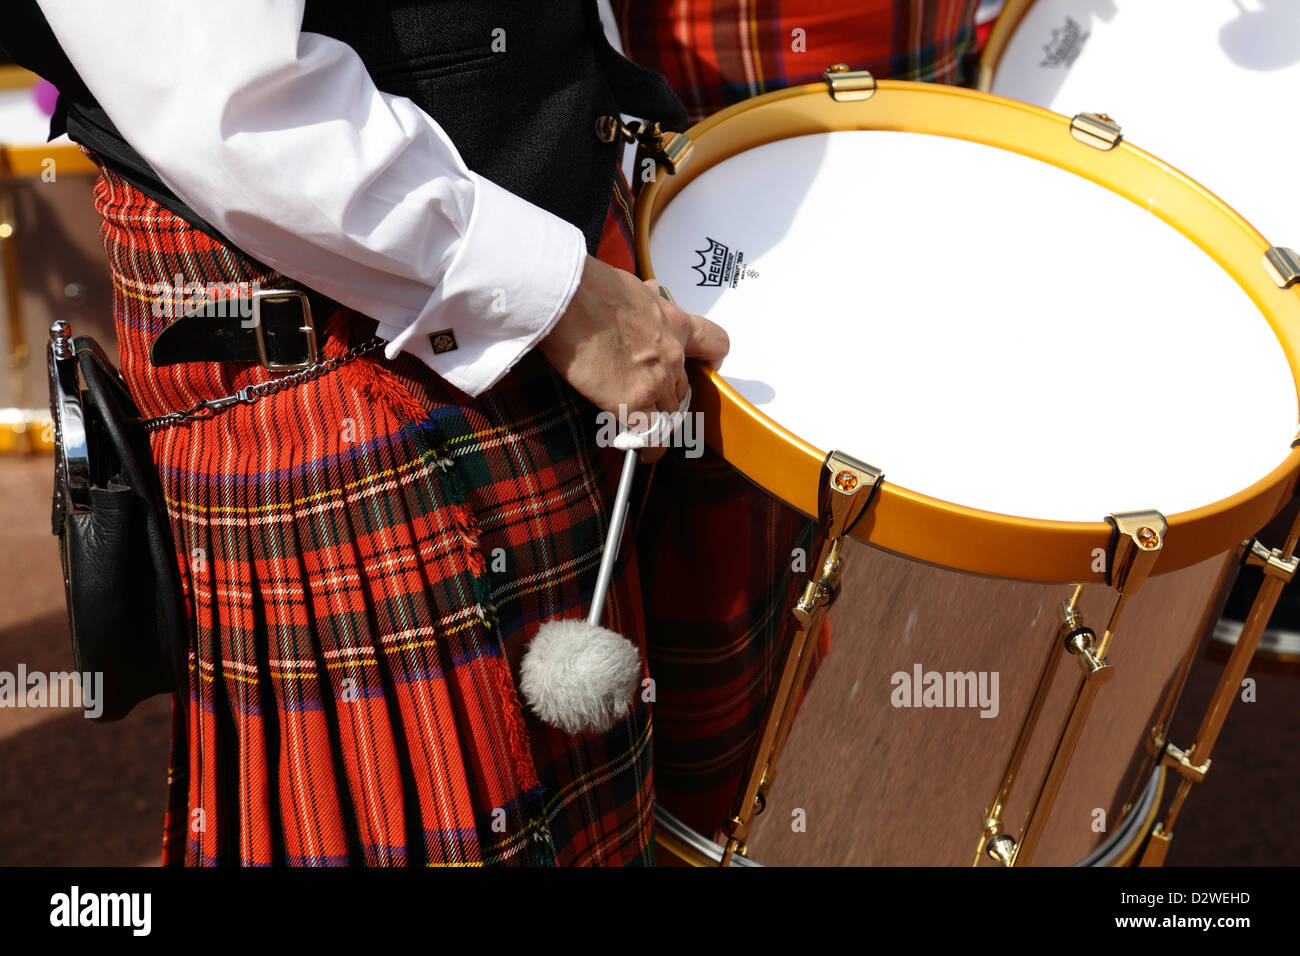 A drummer from the Strathclyde Police Pipe Band at the Piping Live Event, Glasgow, Scotland, UK Stock Photo